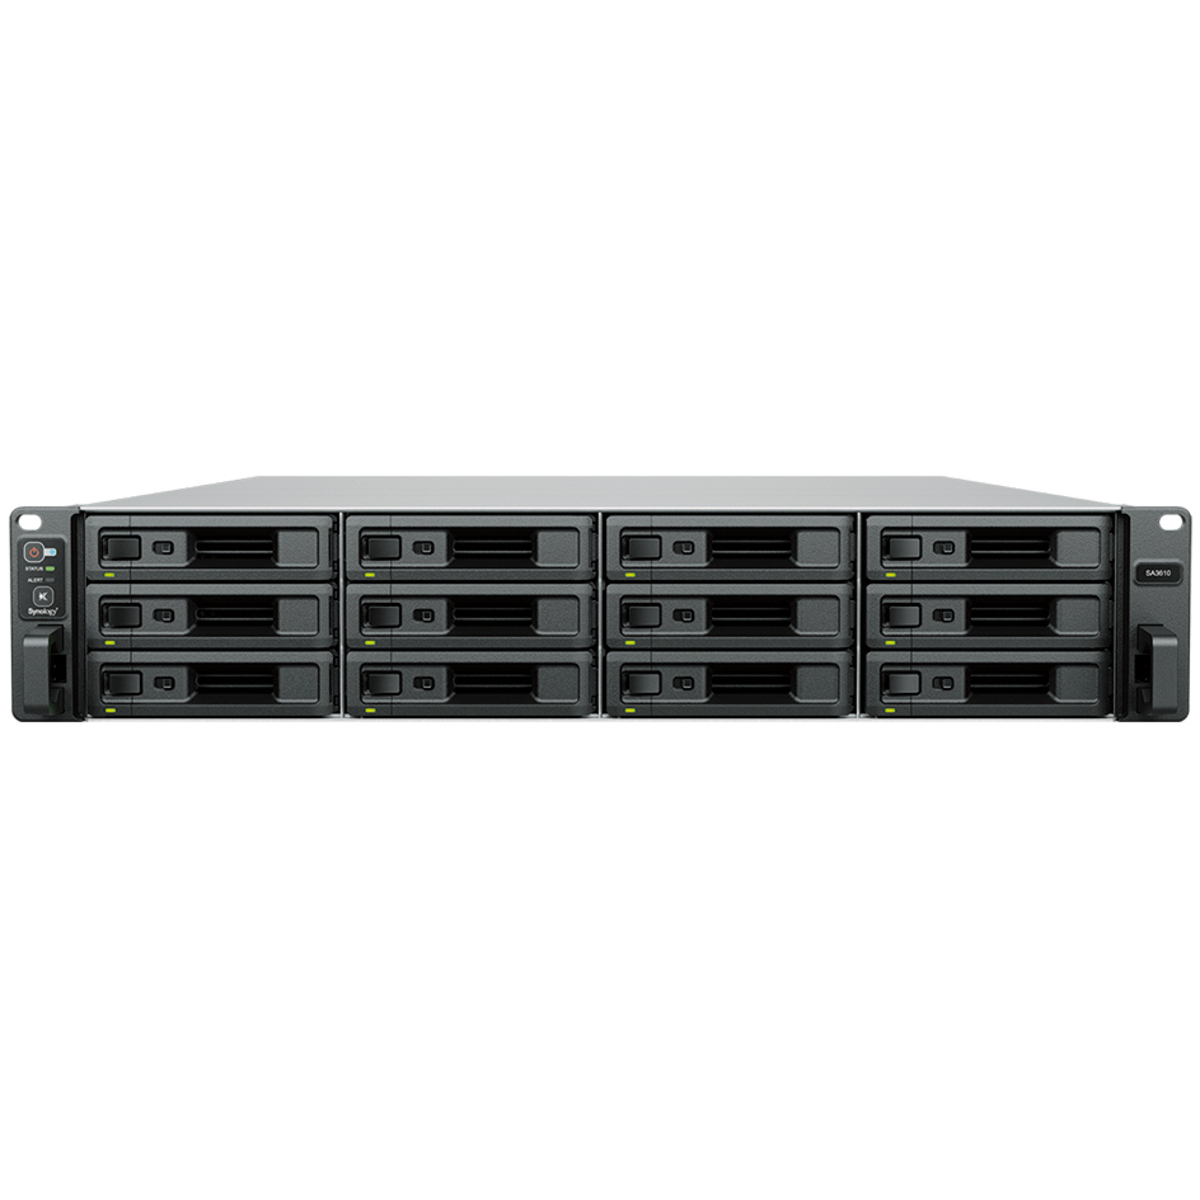 Synology RackStation SA3610 32tb 12-Bay RackMount Large Business / Enterprise NAS - Network Attached Storage Device 8x4tb Crucial MX500 CT4000MX500SSD1 2.5 560/510MB/s SATA 6Gb/s SSD CONSUMER Class Drives Installed - Burn-In Tested RackStation SA3610